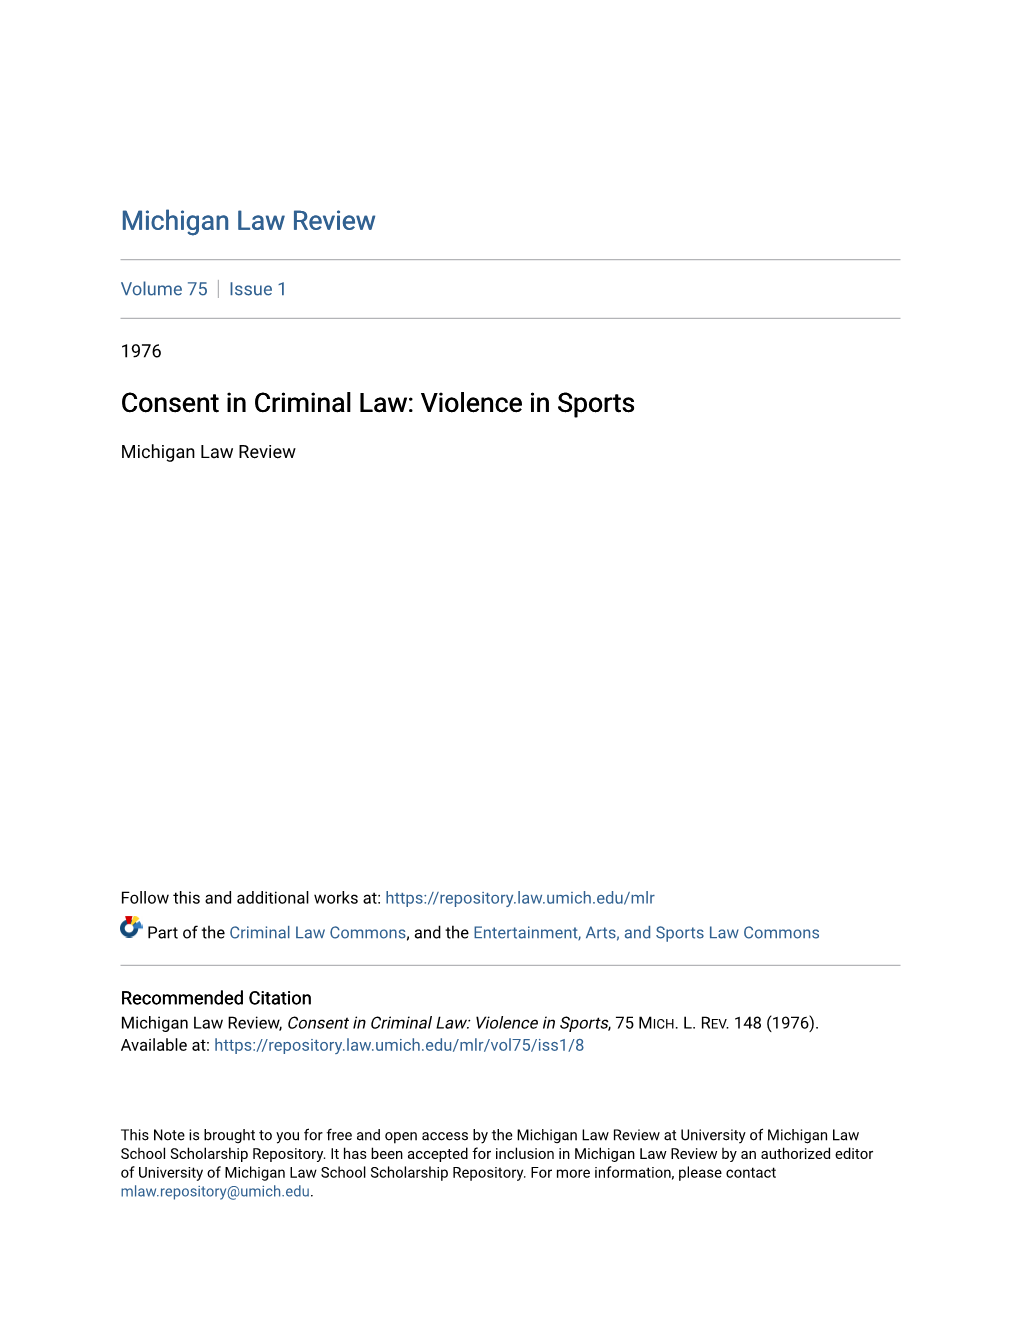 Consent in Criminal Law: Violence in Sports